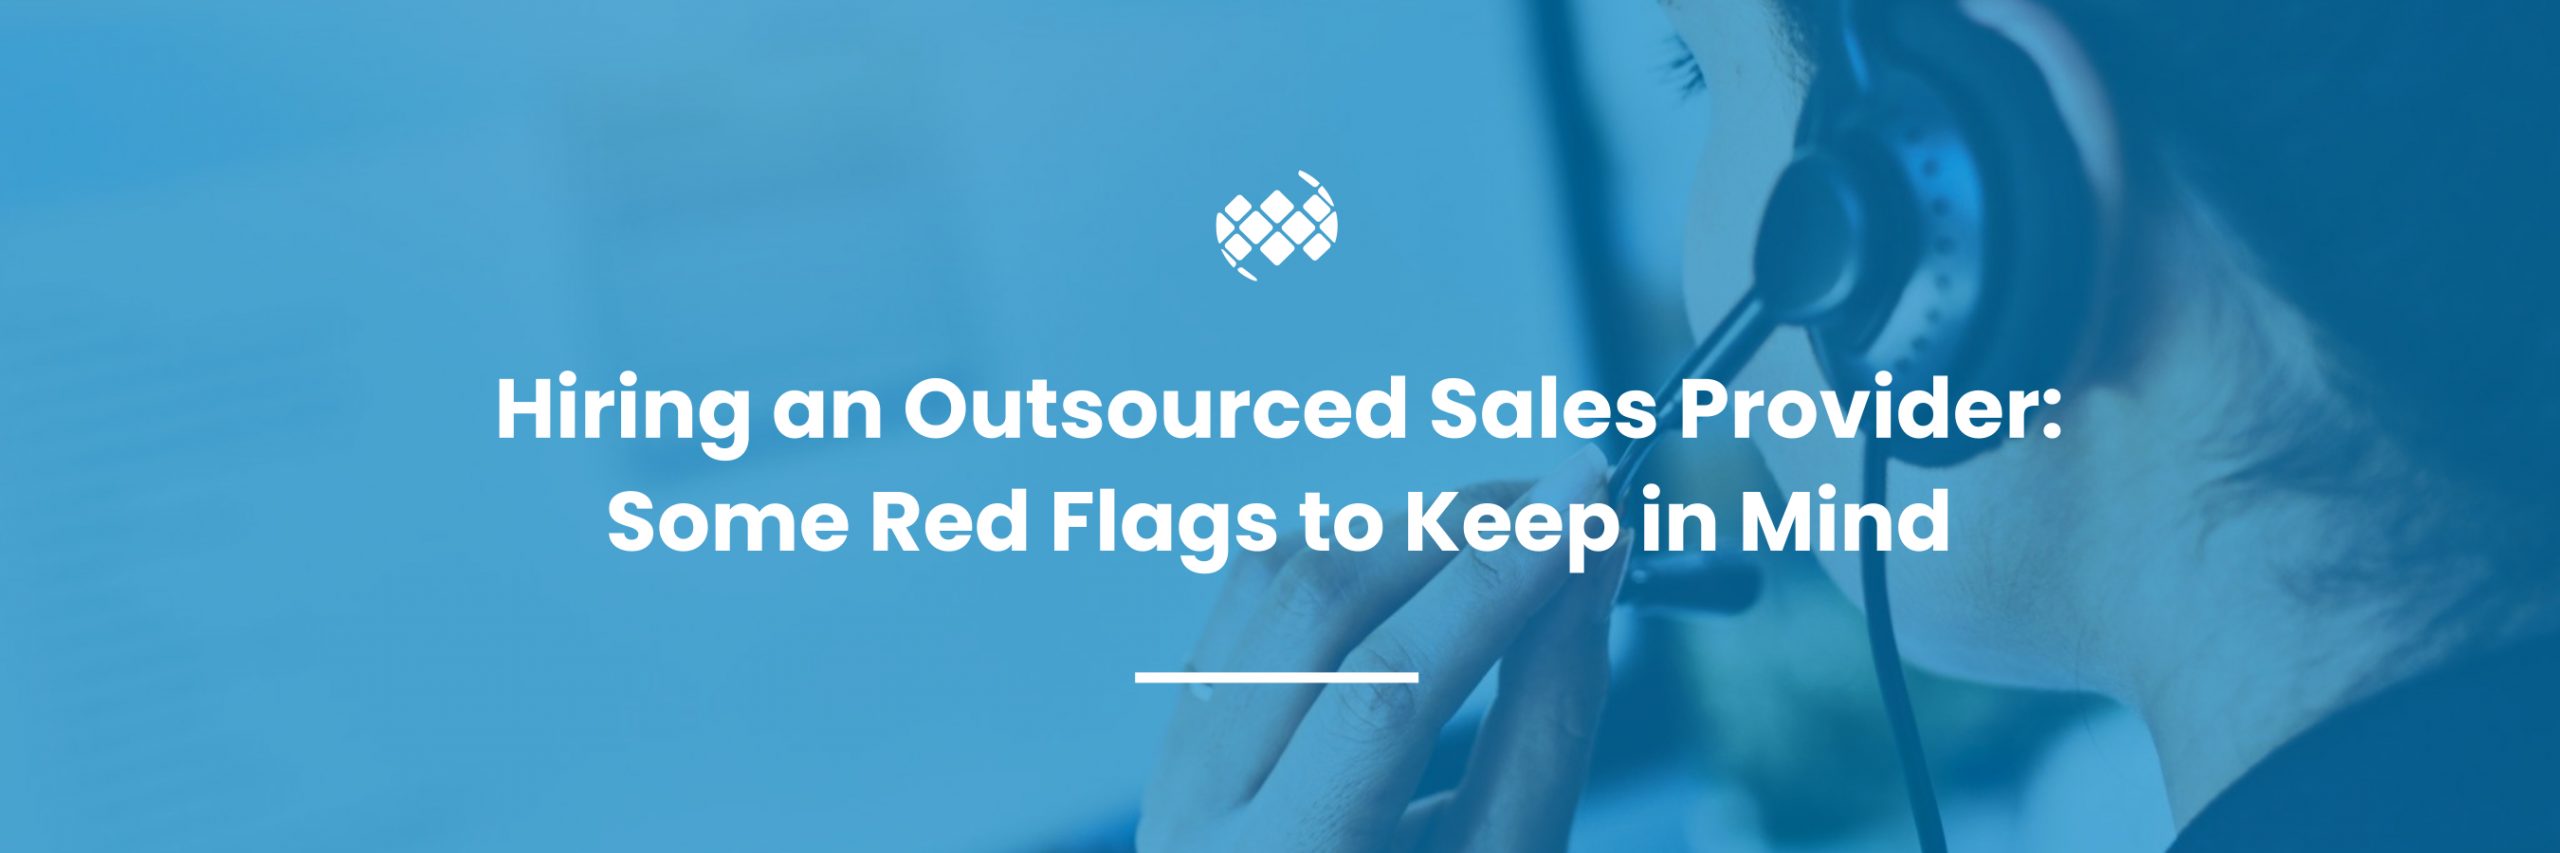 hiring an outsourced sales provider